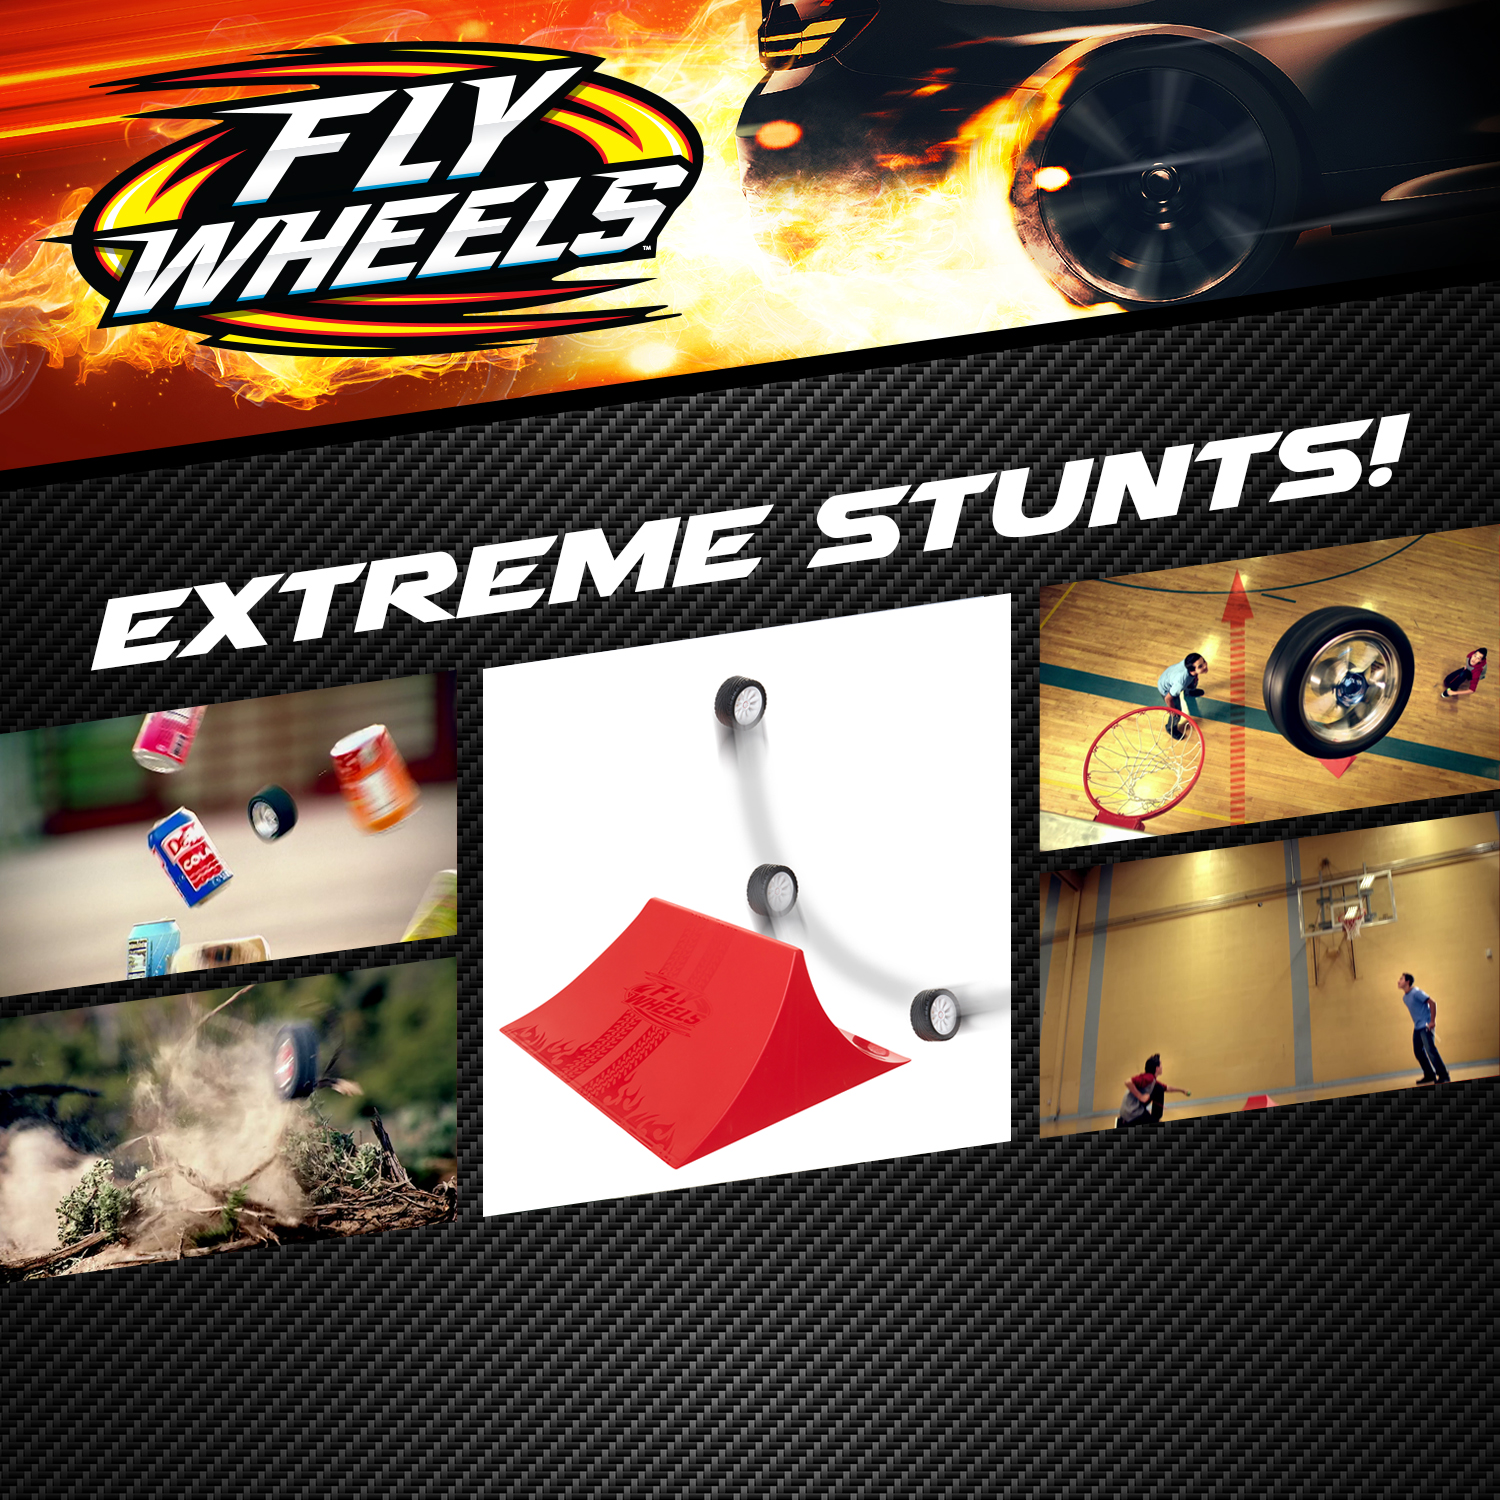 Fly Wheels Launcher + 2 2 Moto Wheels - Rip it up to 200 Scale MPH, Fast Speed, Amazing Stunts & Jumps up to 30 feet! All Terrain Action: dirt, mud, water, snow- One of the hottest wheels around! - image 3 of 6